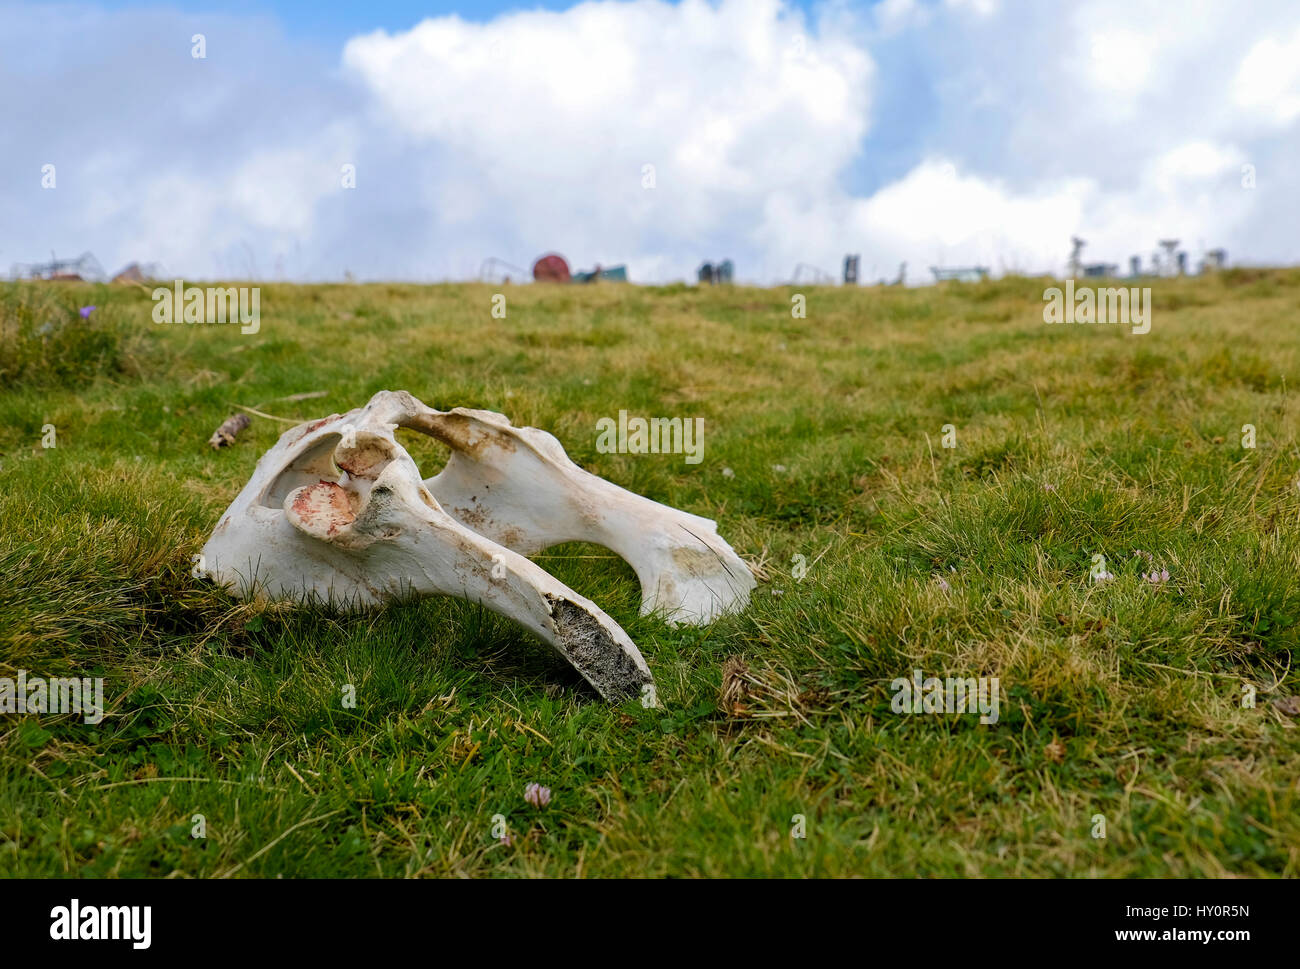 bone remnants lying in open air on the grass Stock Photo